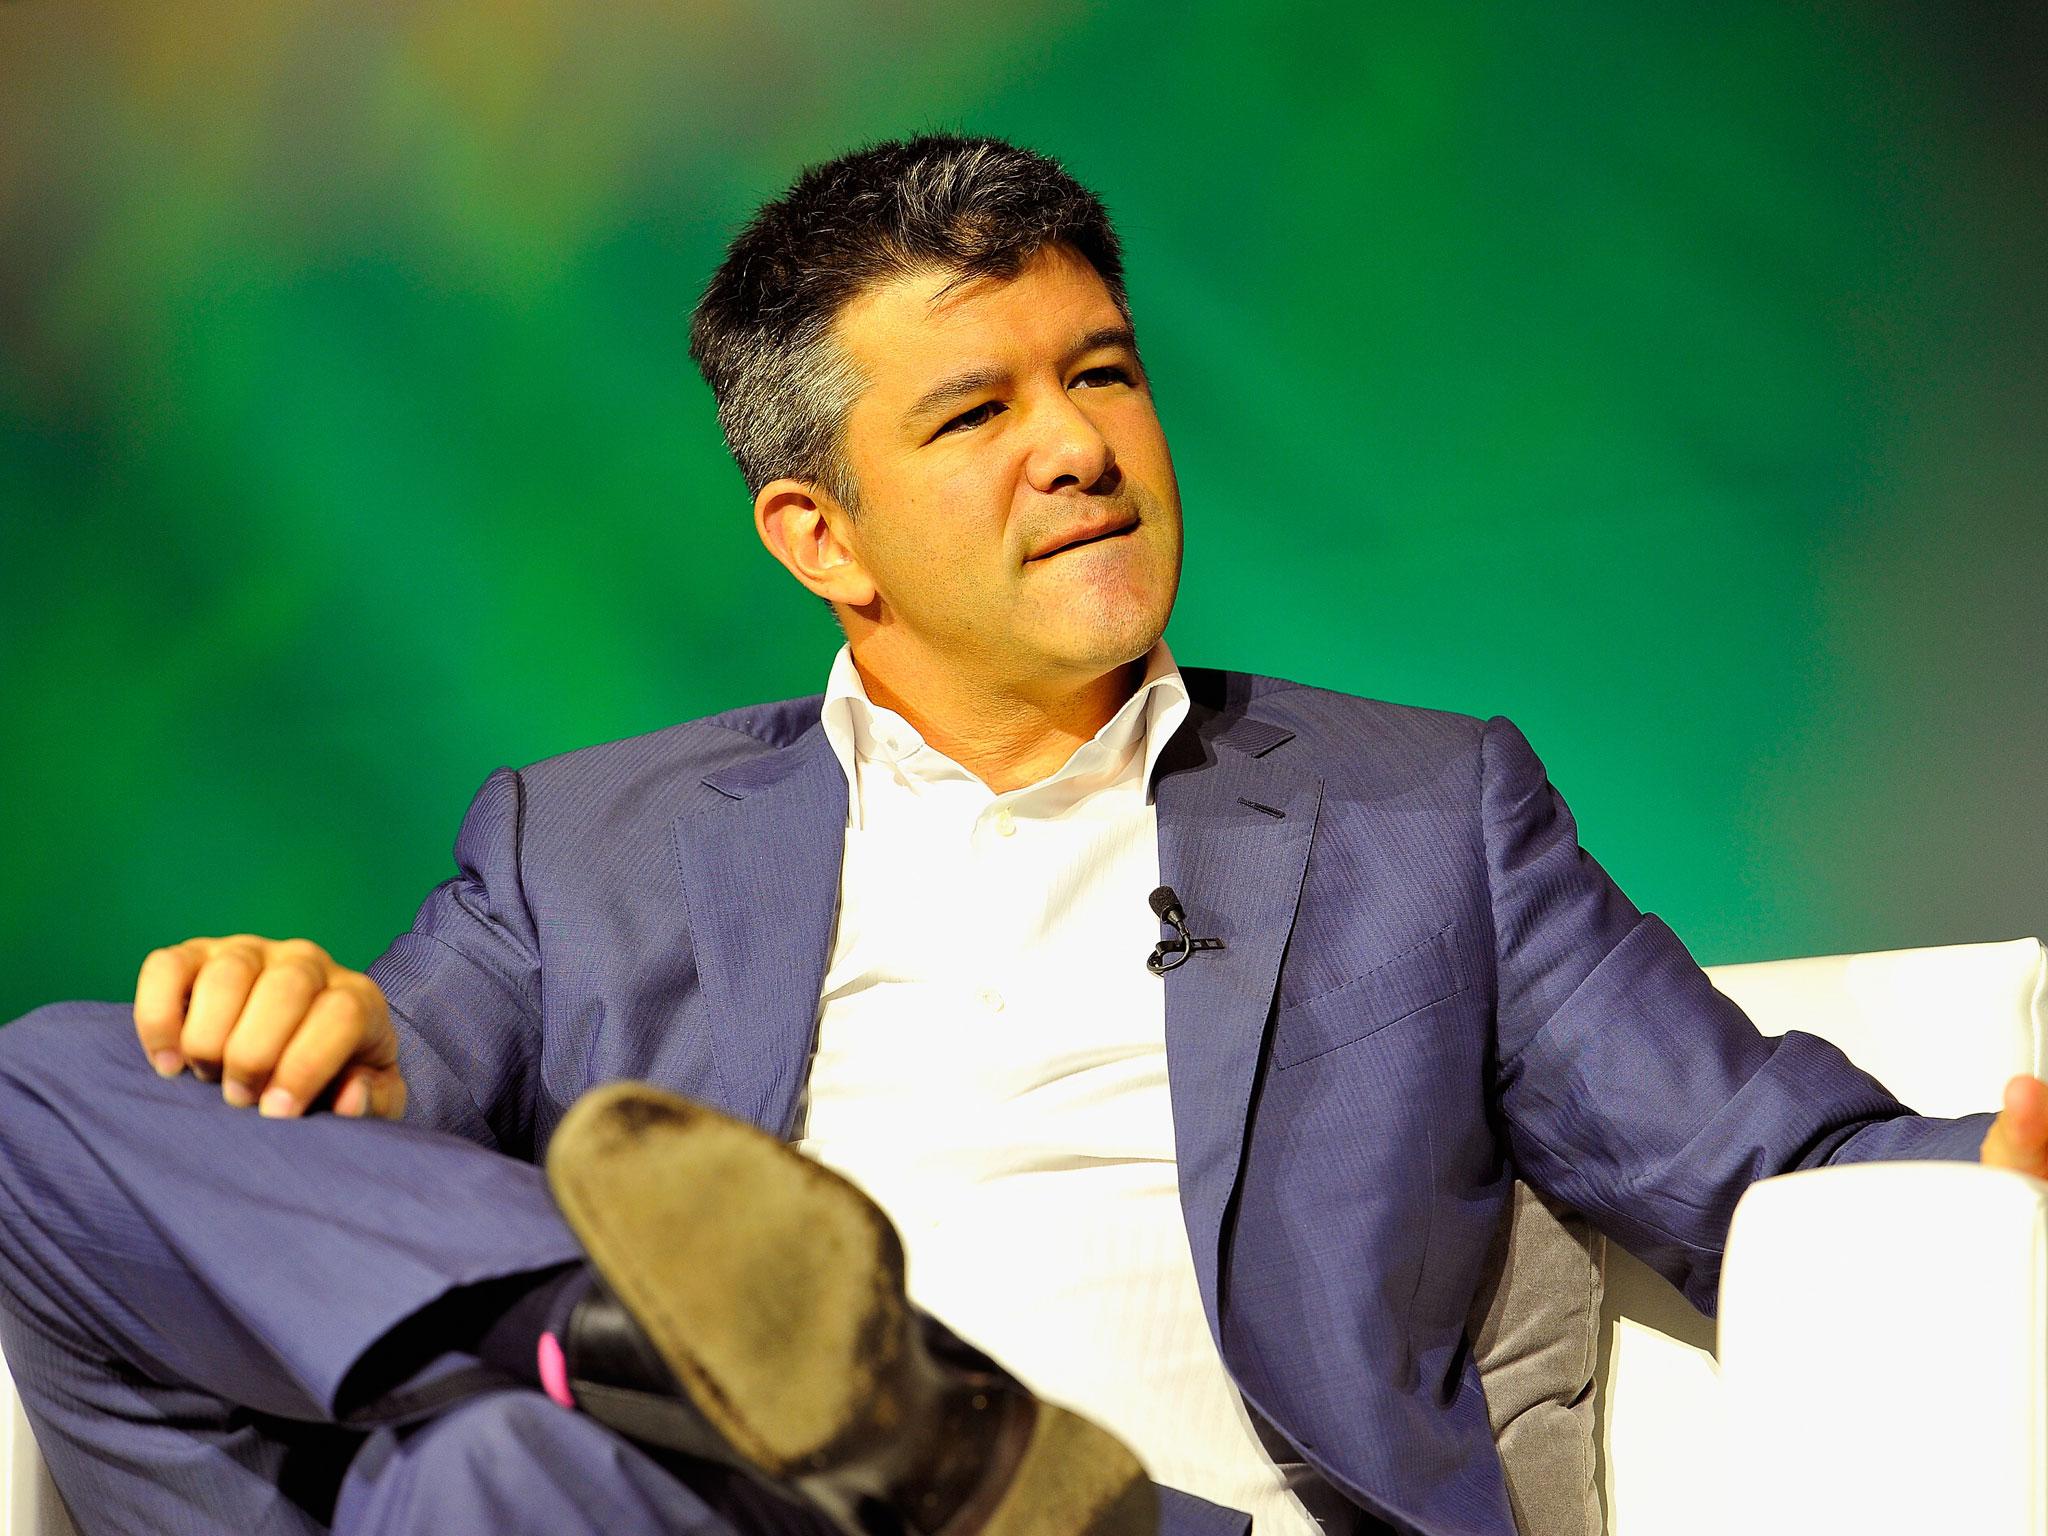 Tech superstars such as Uber’s Travis Kalanick now change others' game